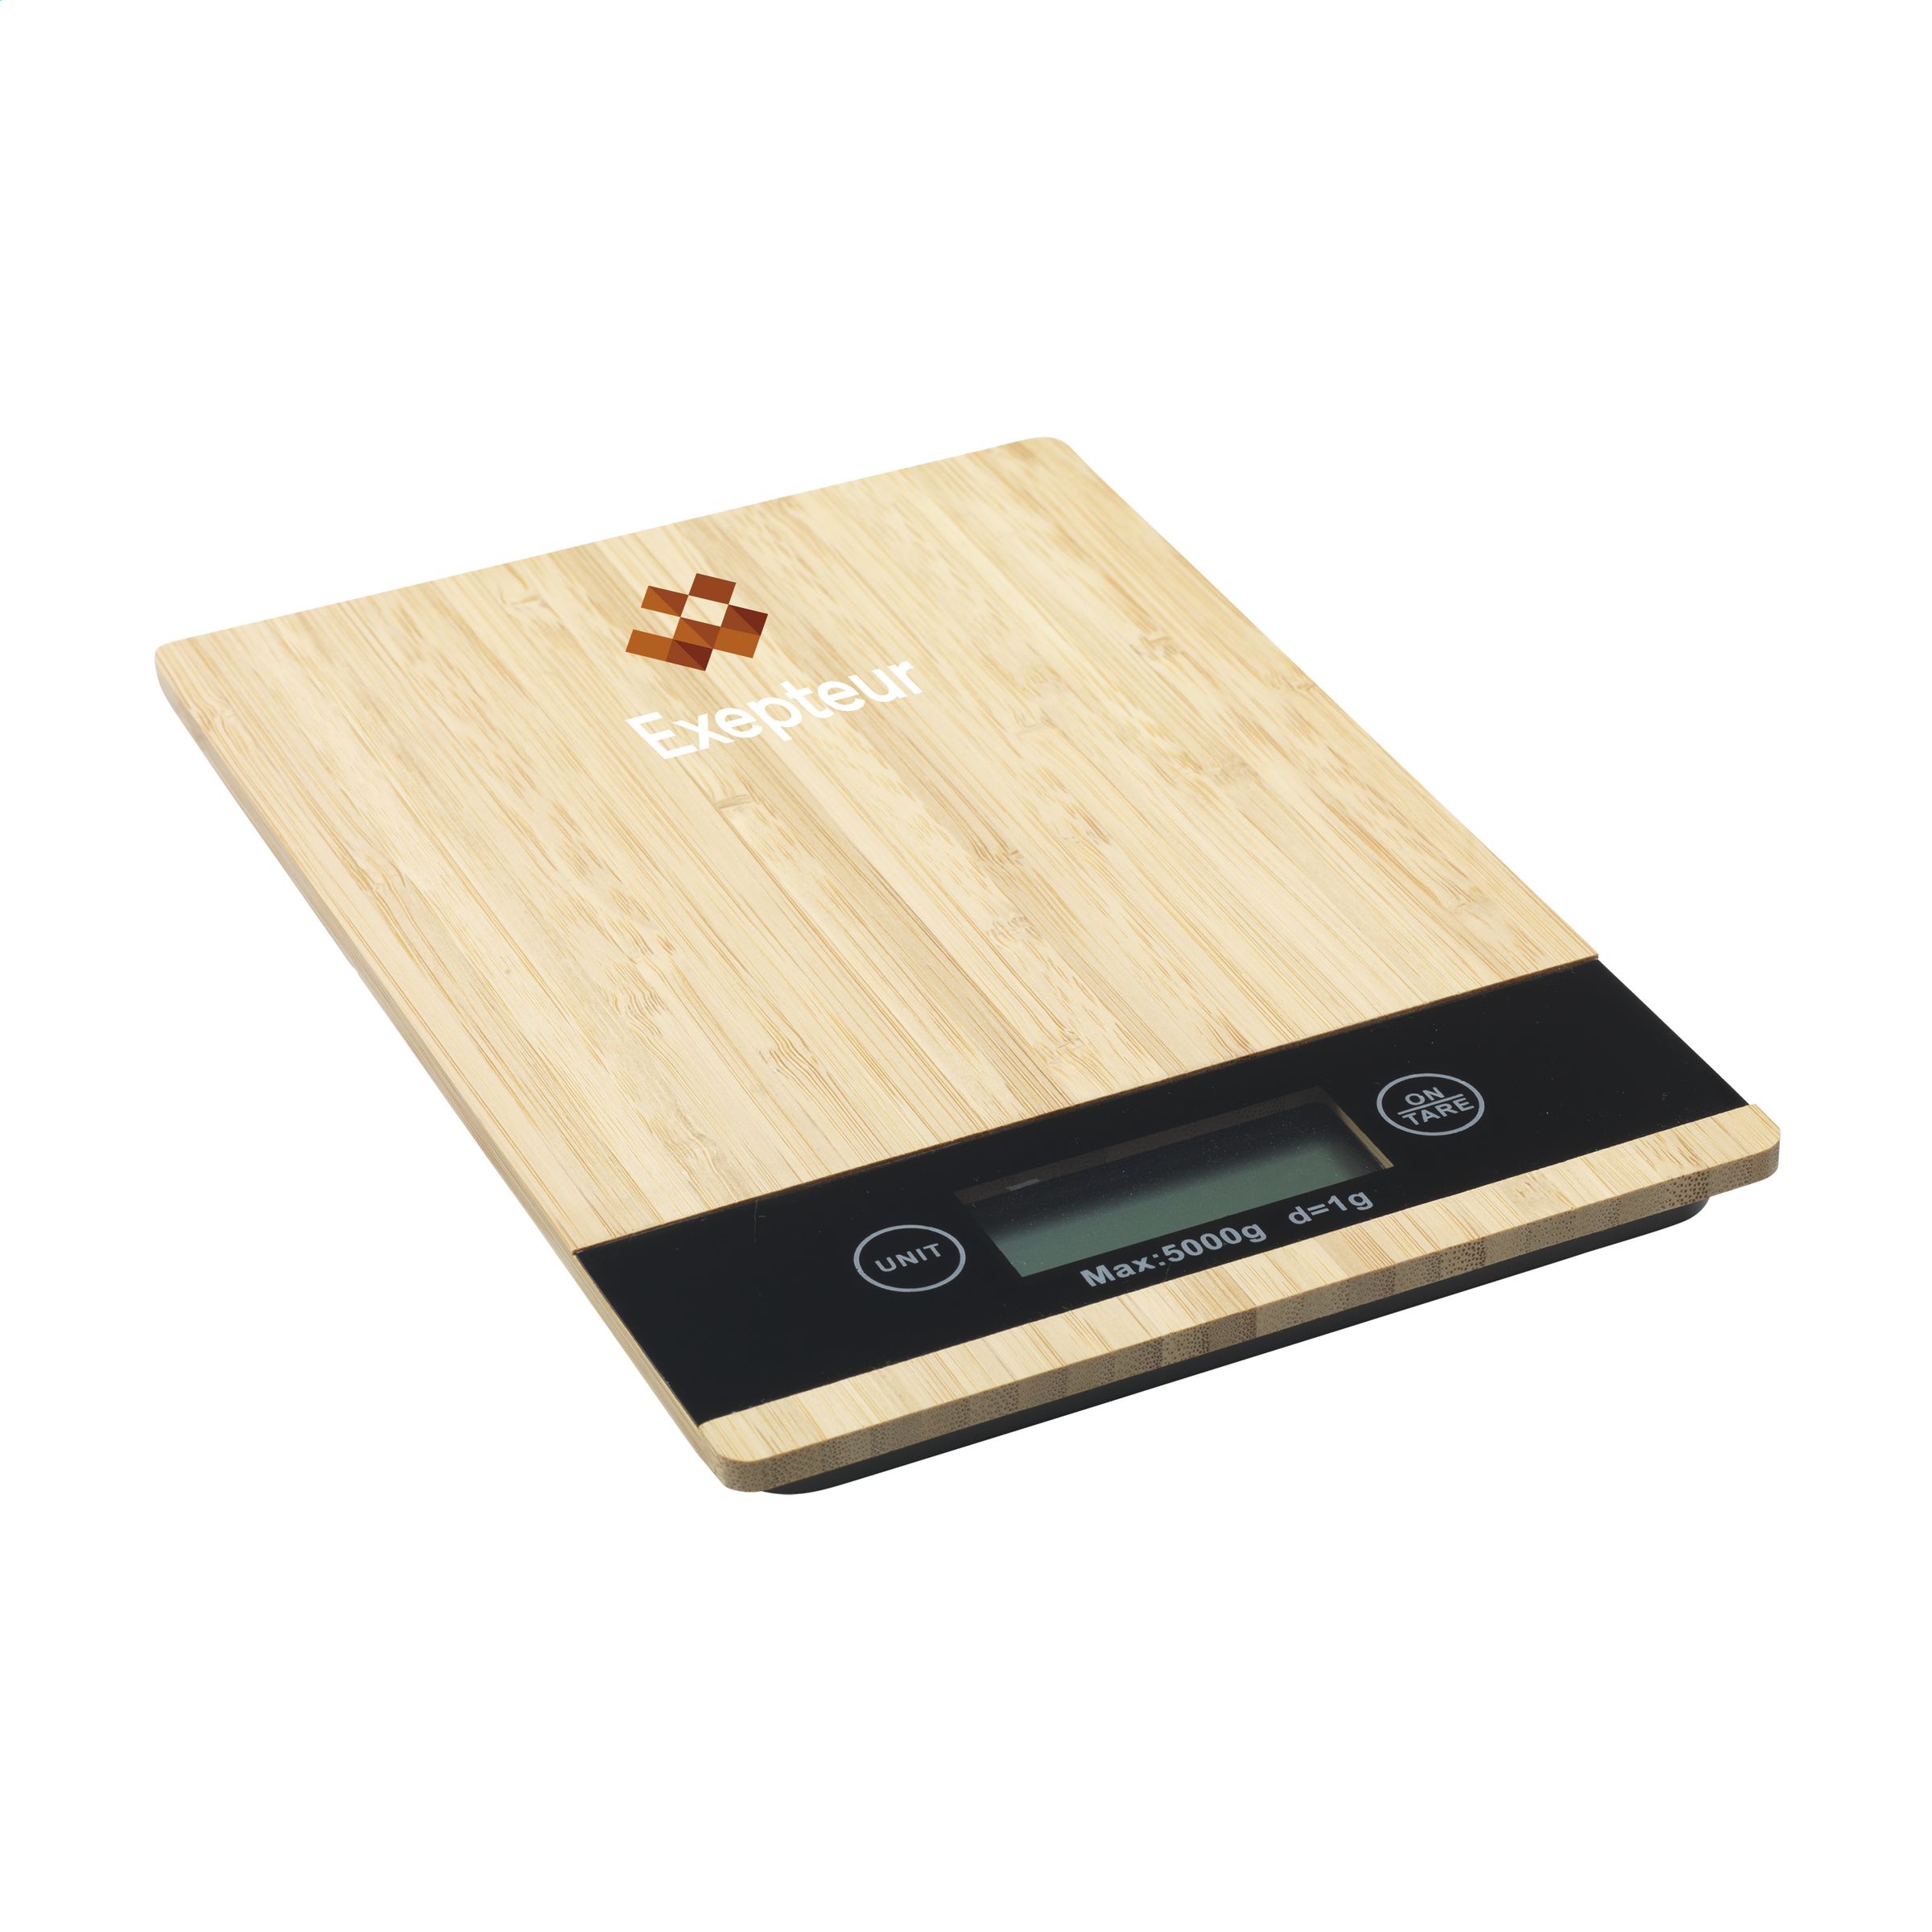 Kitchen scale made from bamboo - Piddletrenthide - Ightham